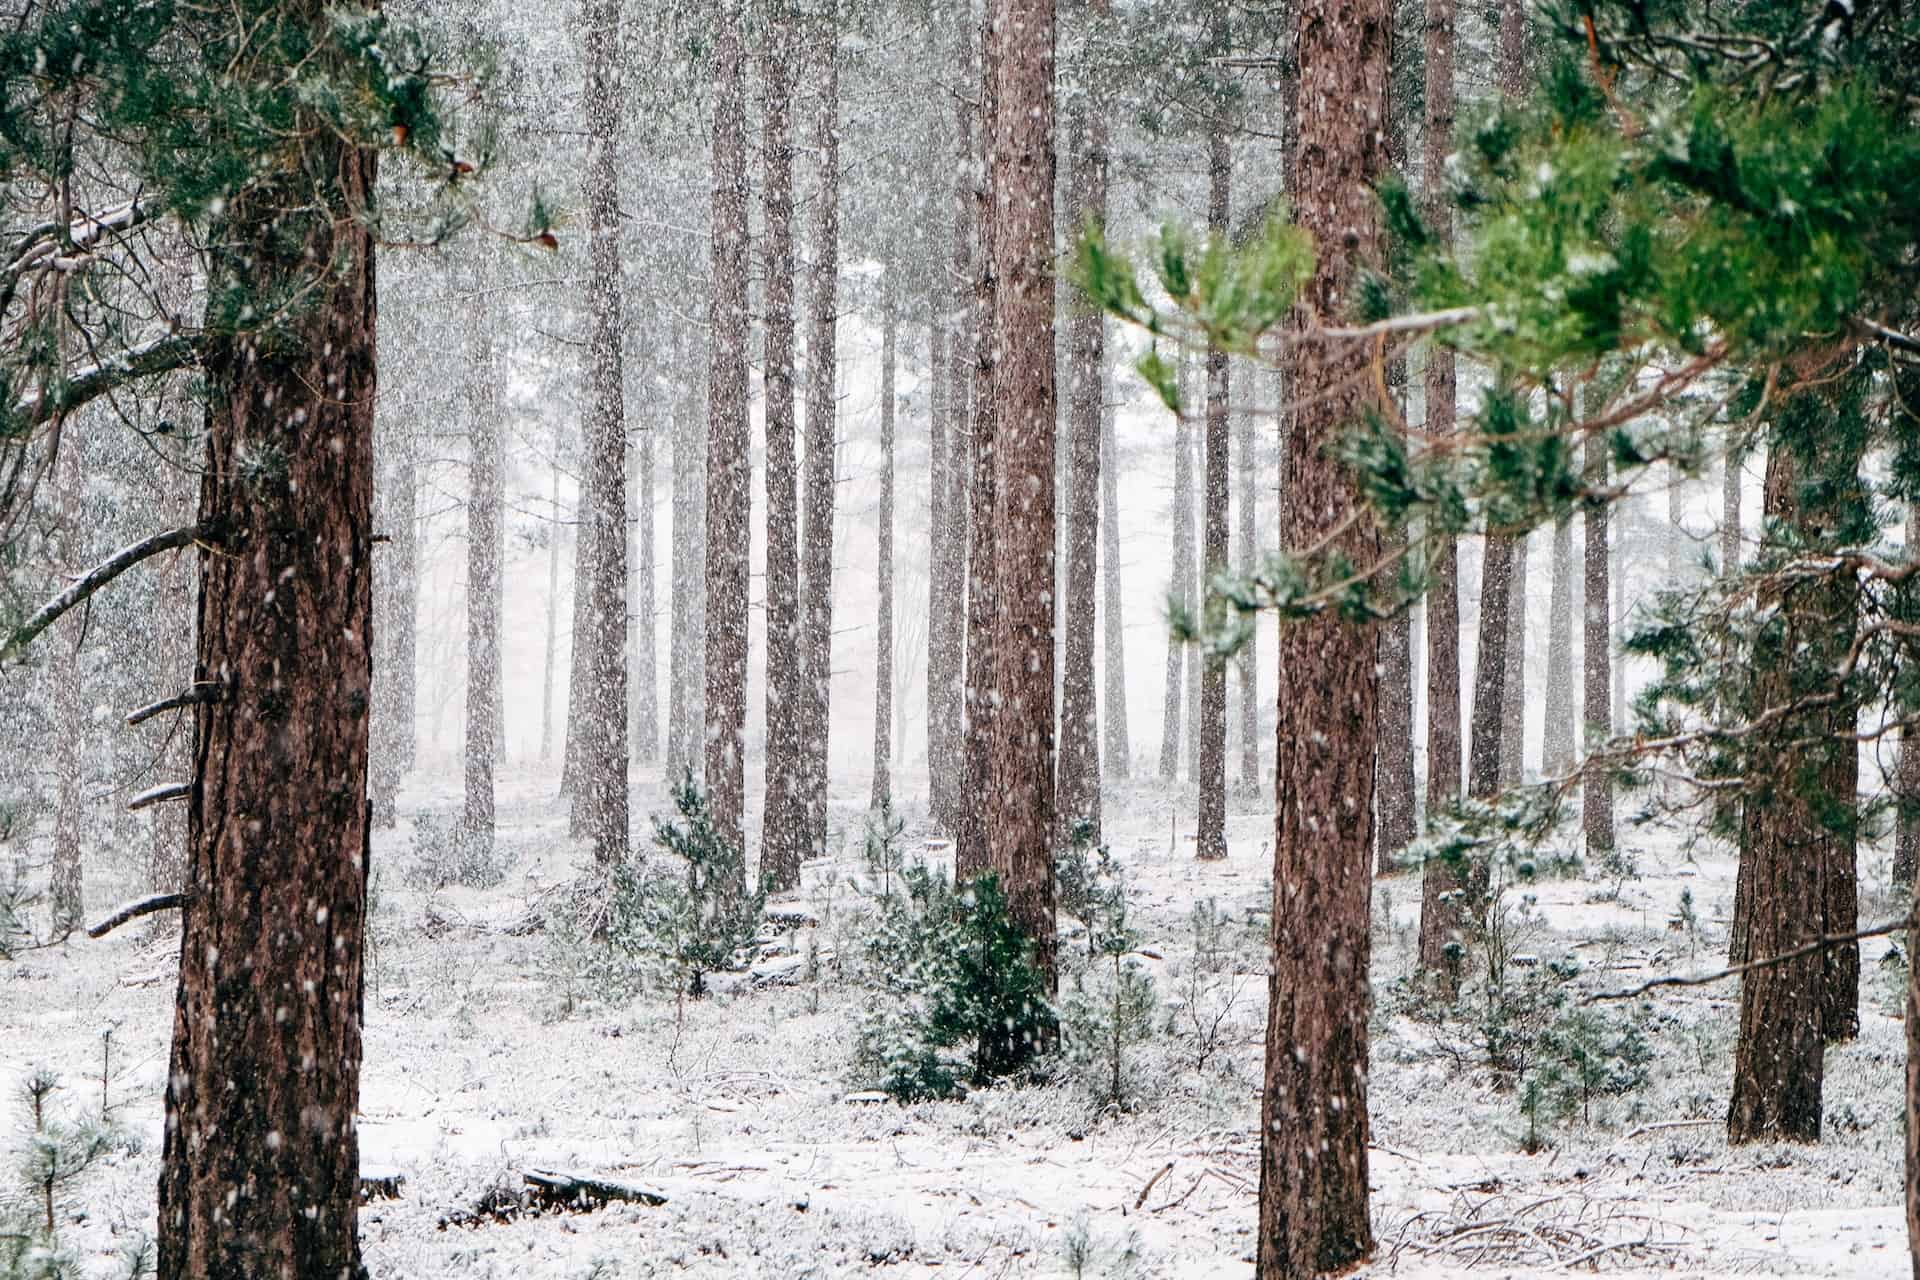 Snow falling in a forest